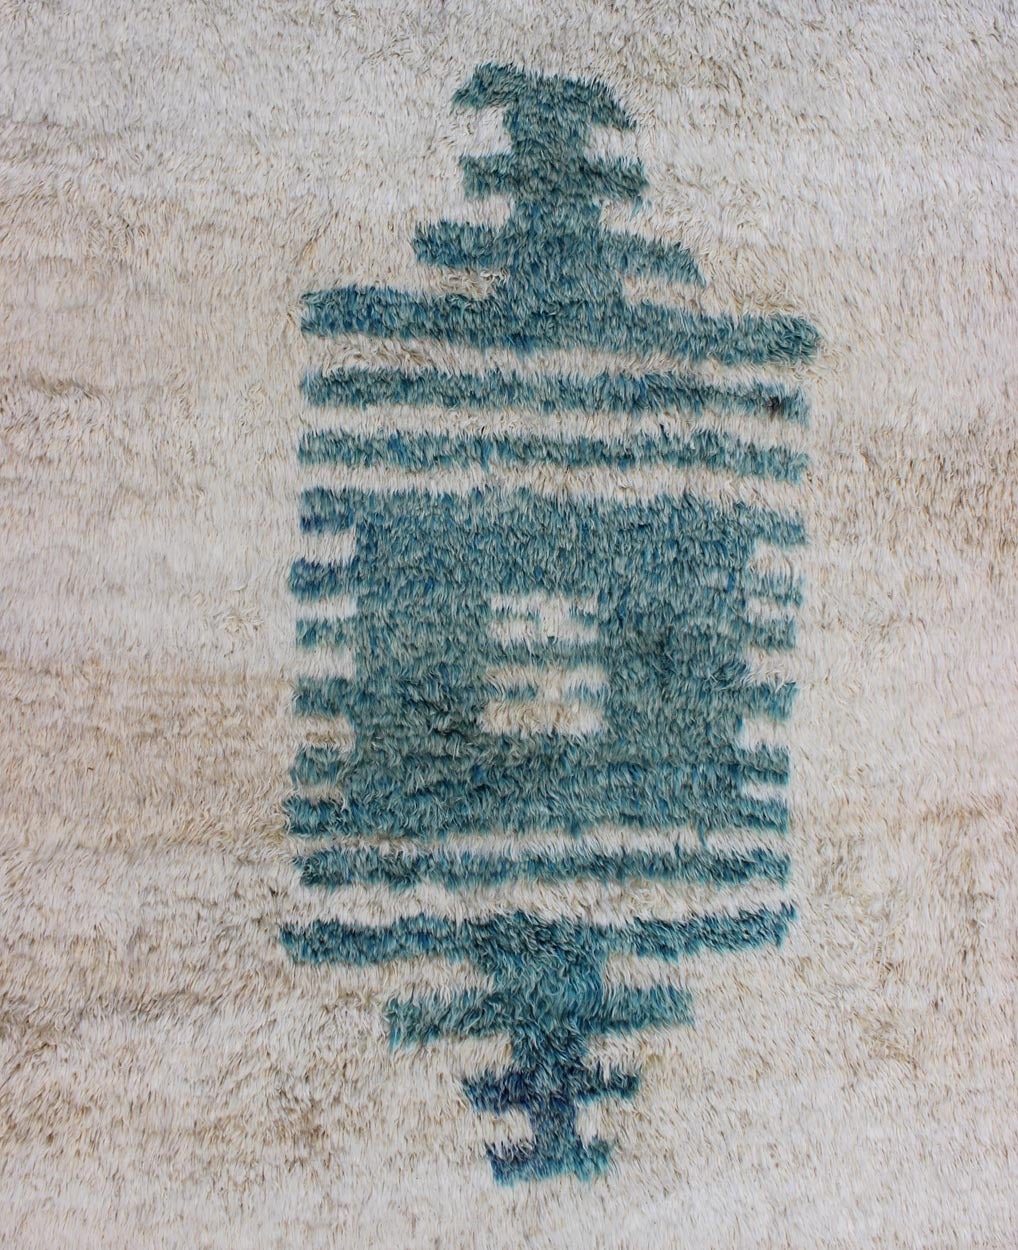 Unique Turkish Vintage Tulu Rug with Modern Design in Teal & Off White.
This unique Tulu demonstrates a balance between a tribal motif and a freely floating modern design. The blue/green medallion contrasts elegantly with the warm Off-white field,